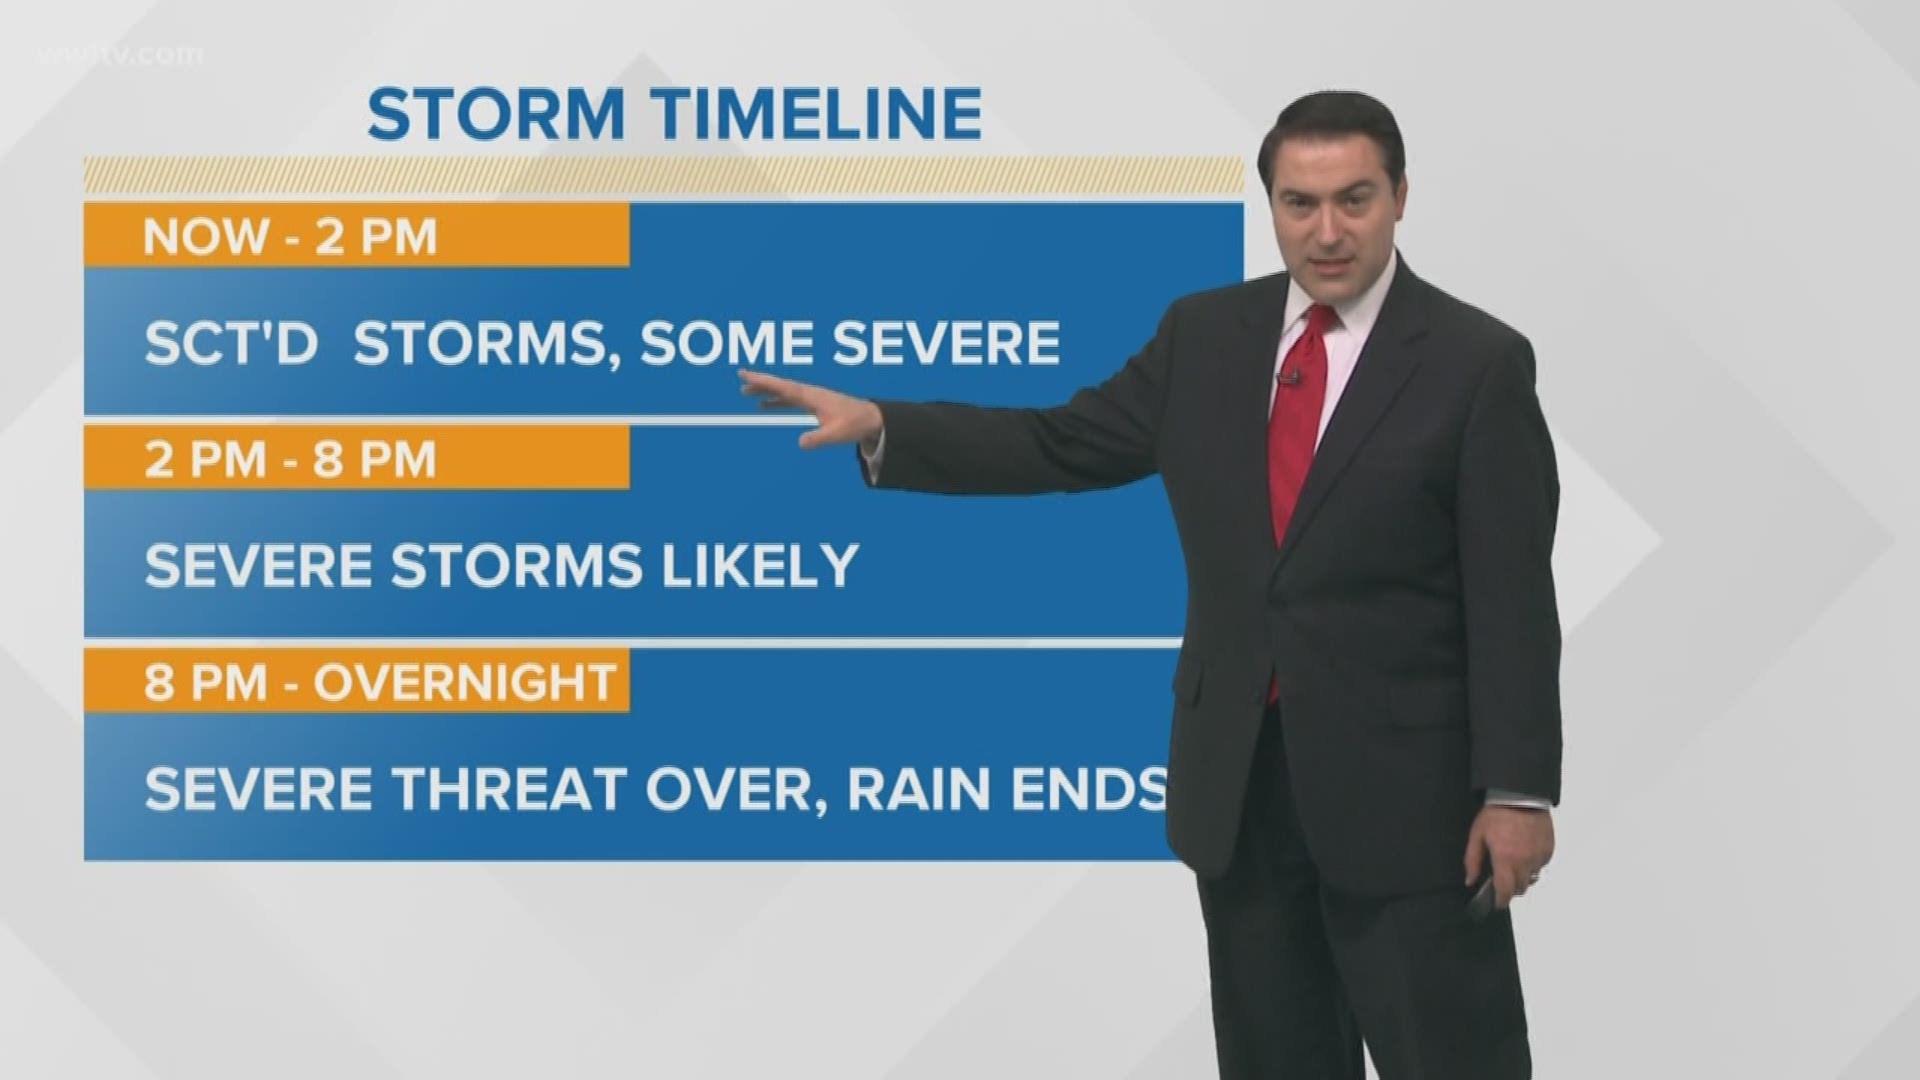 Meteorologist Dave Nussbaum says the Enhanced Risk remains over us we will have some strong to severe storms today with damaging winds, large hail and isolated tornadoes.